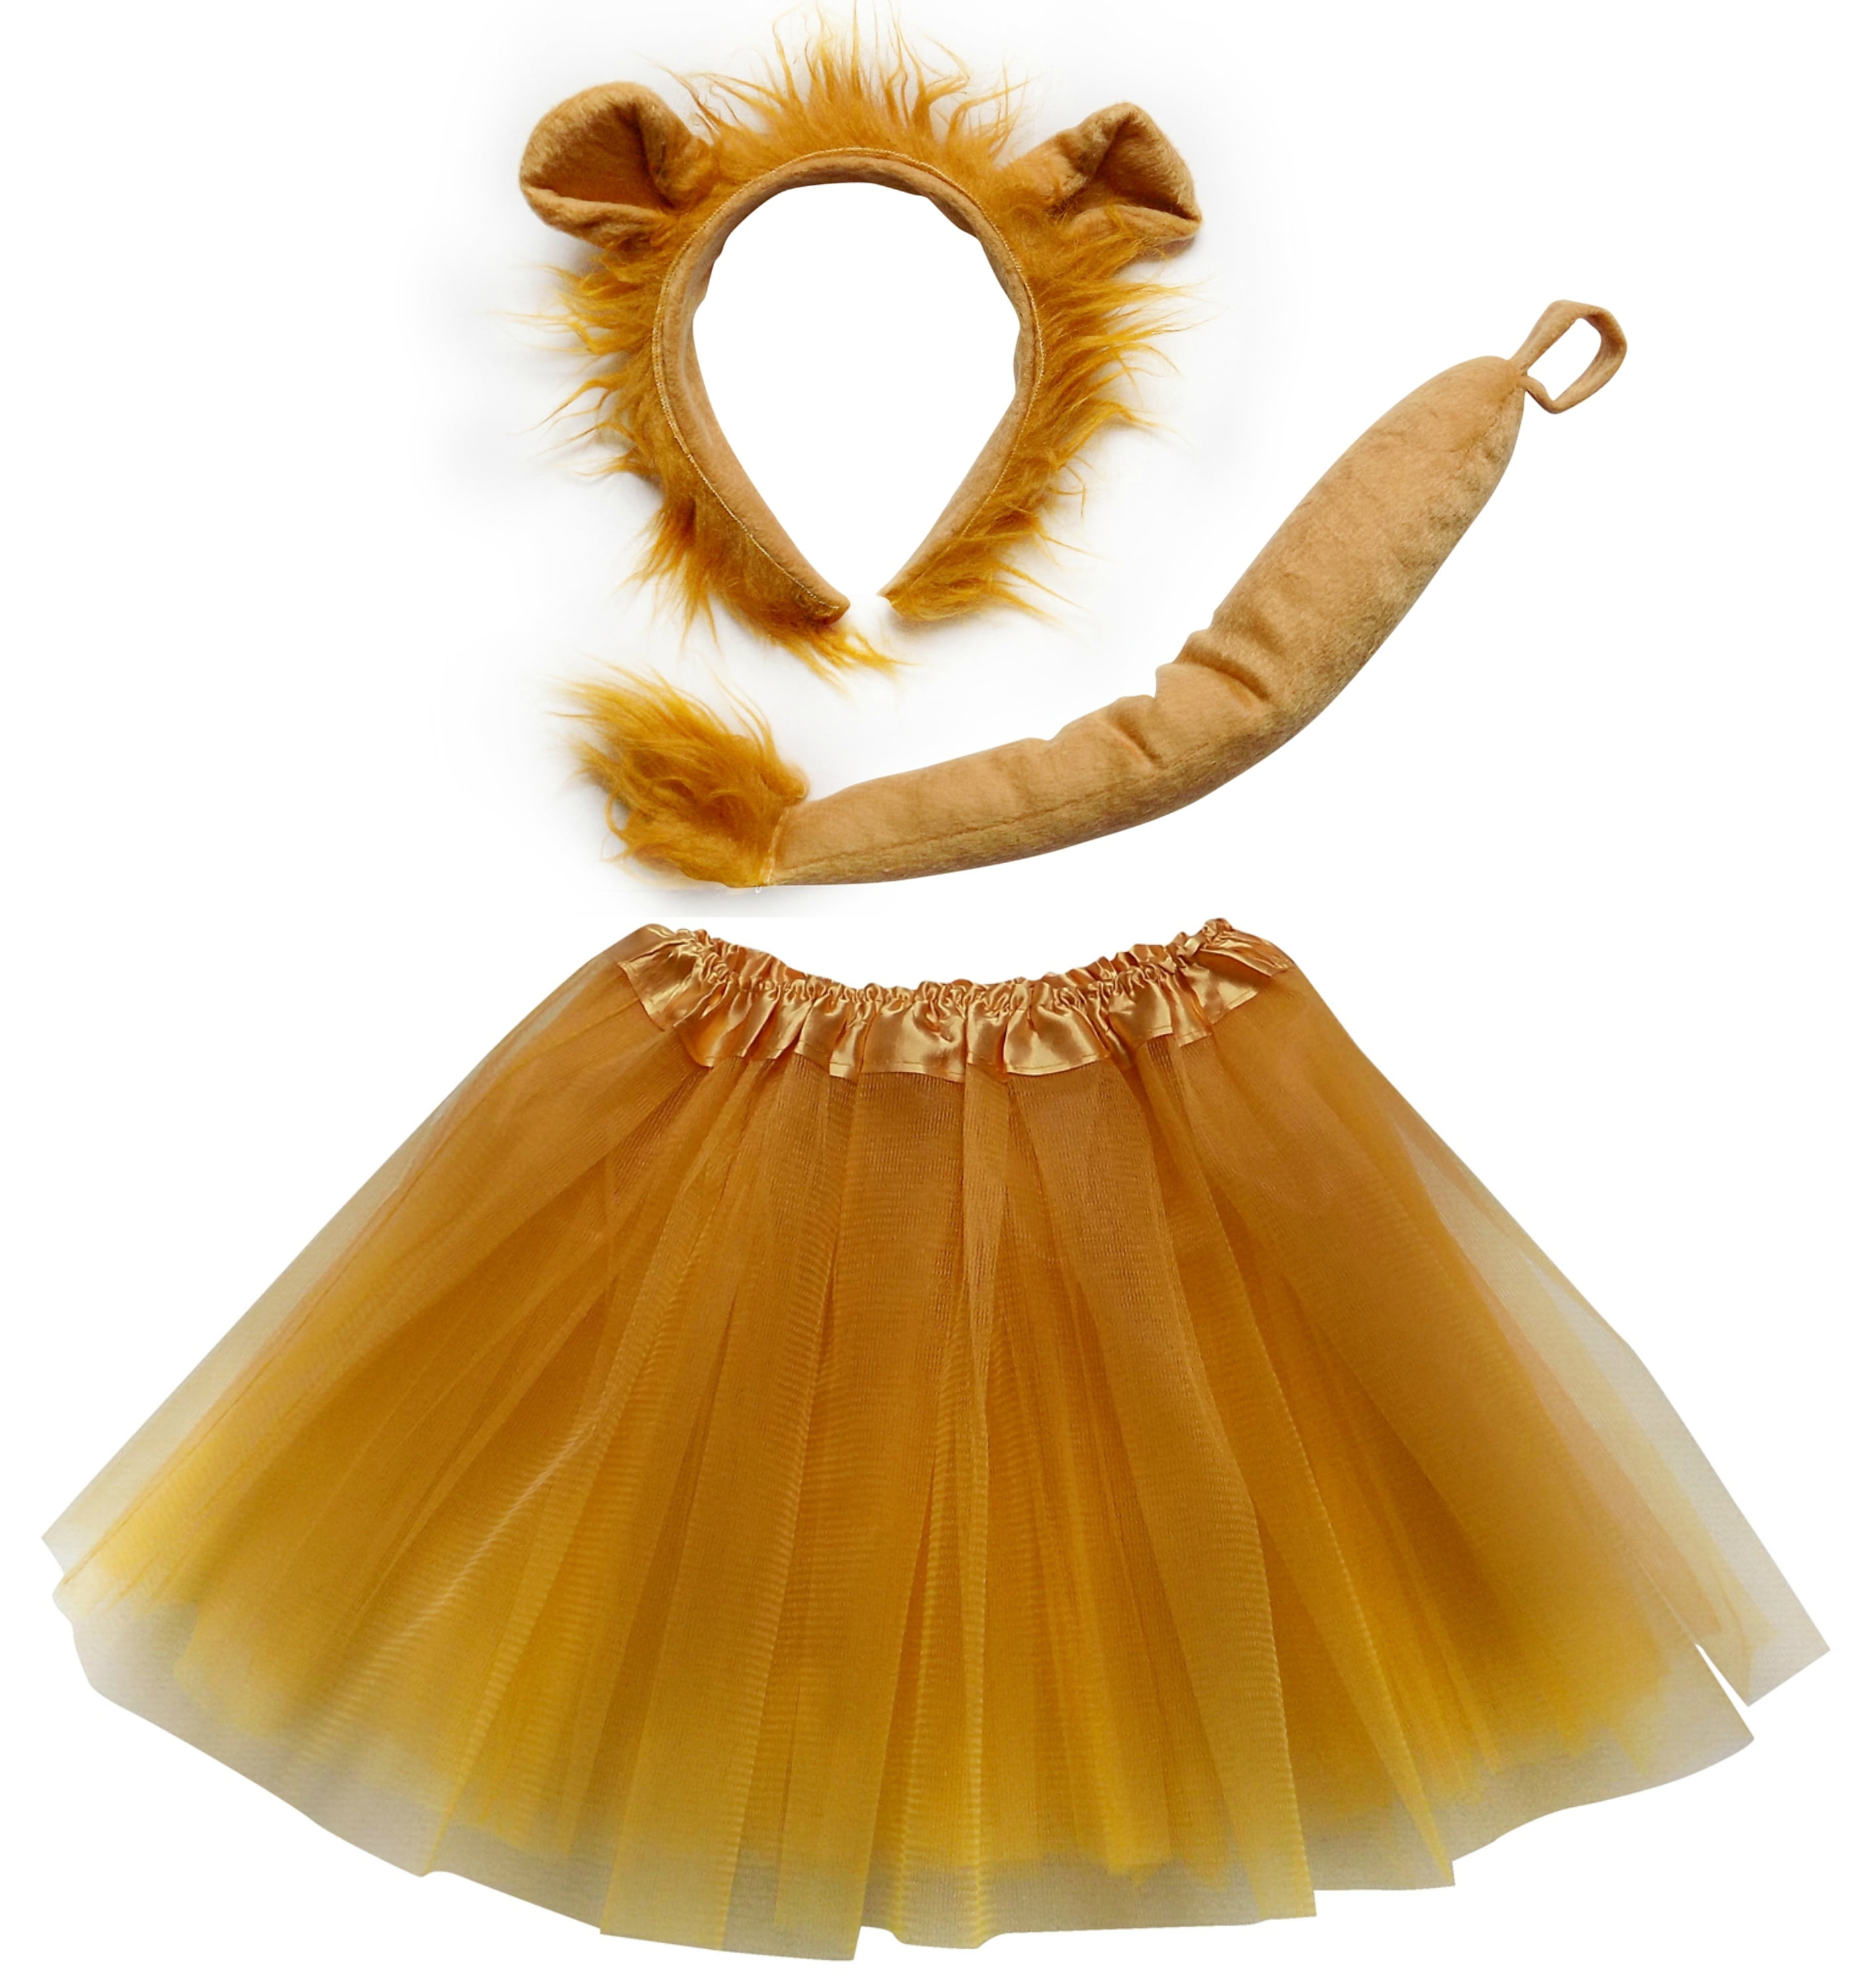 Lion Ears And Tail Set Pale Gold/Brown Long Tail Instant Fancy Dress Handmade 